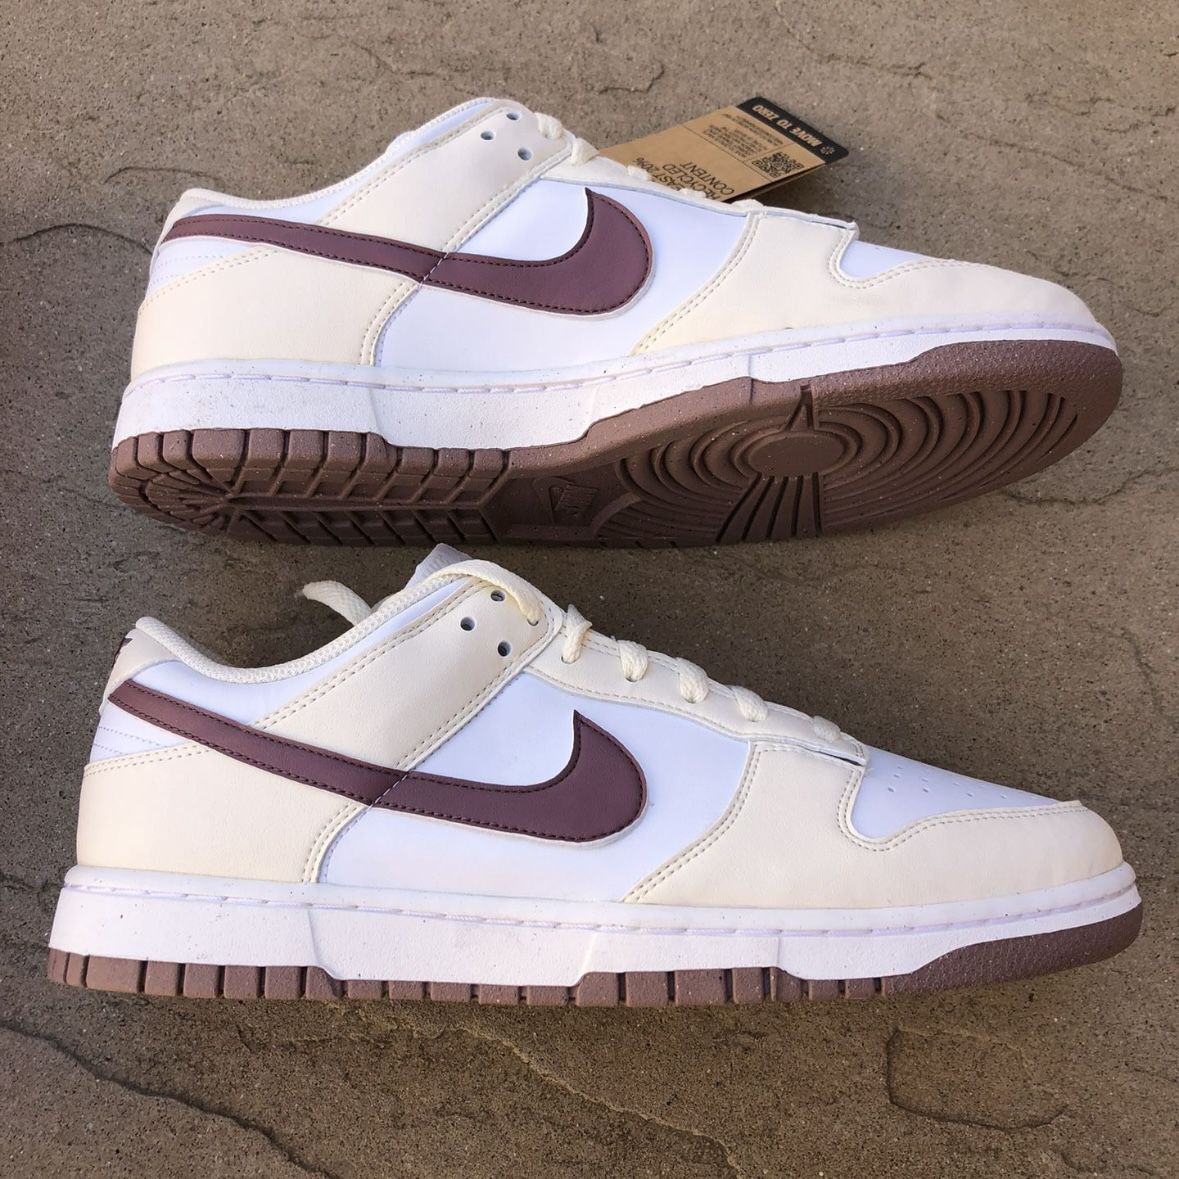 New Nike Dunk Low Coconut Mauve Women’s 5 11, Youth 3.5y, Men’s 9.5